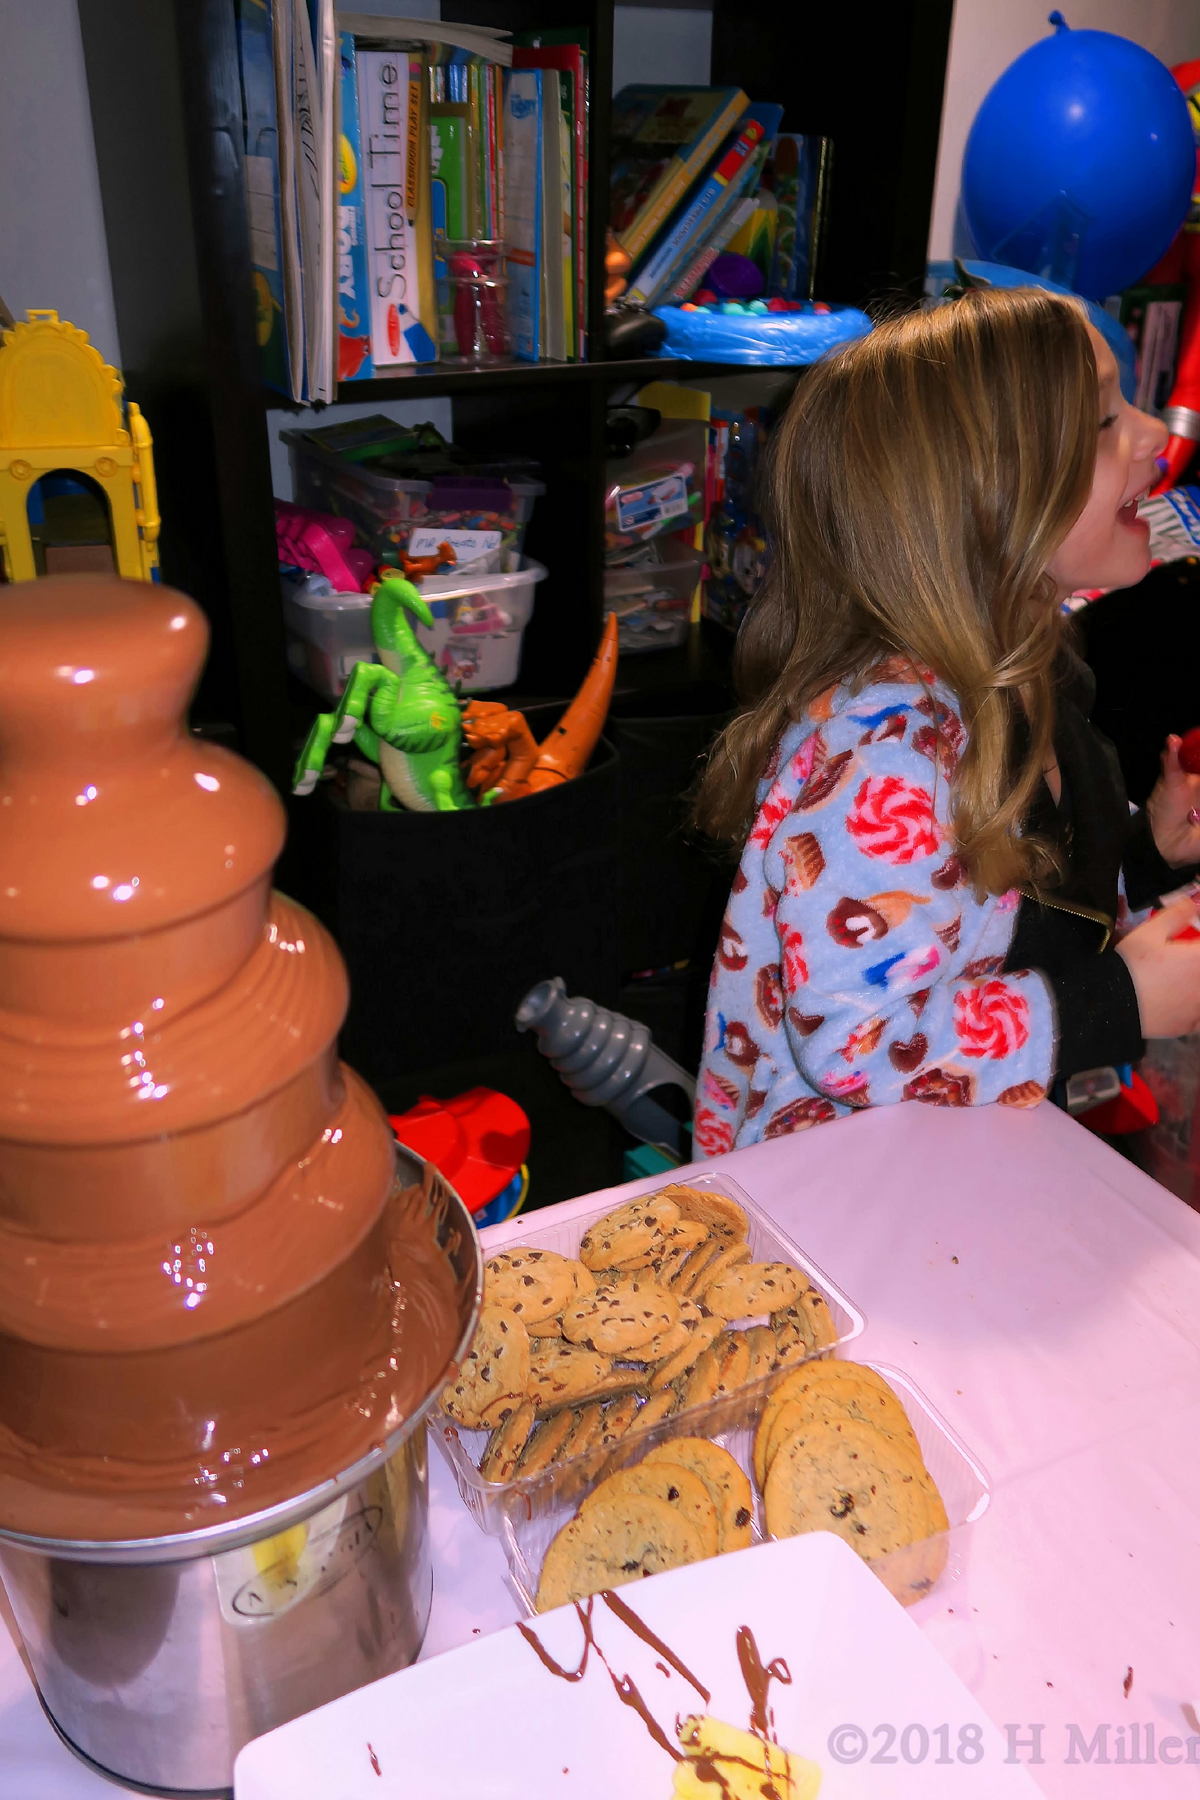 Everything Is Better Dipped In The Chocolate Fountain! 